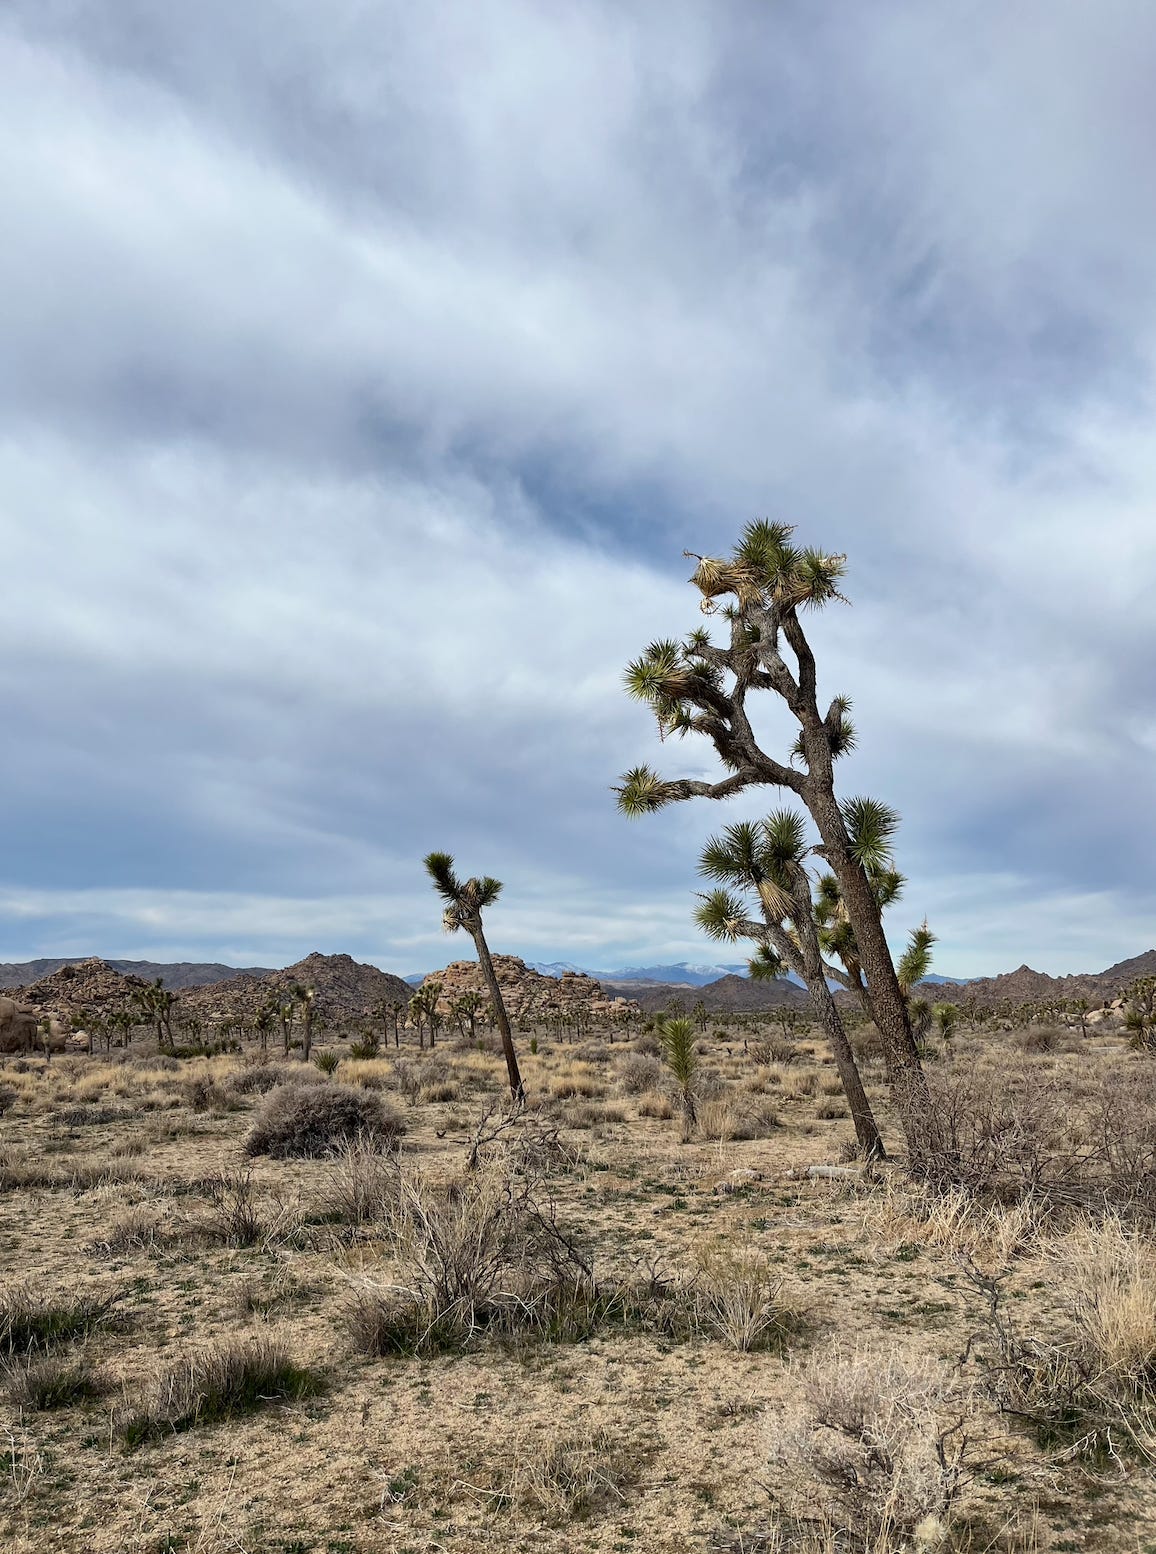 storm clouds over the desert landscape of Joshua Tree